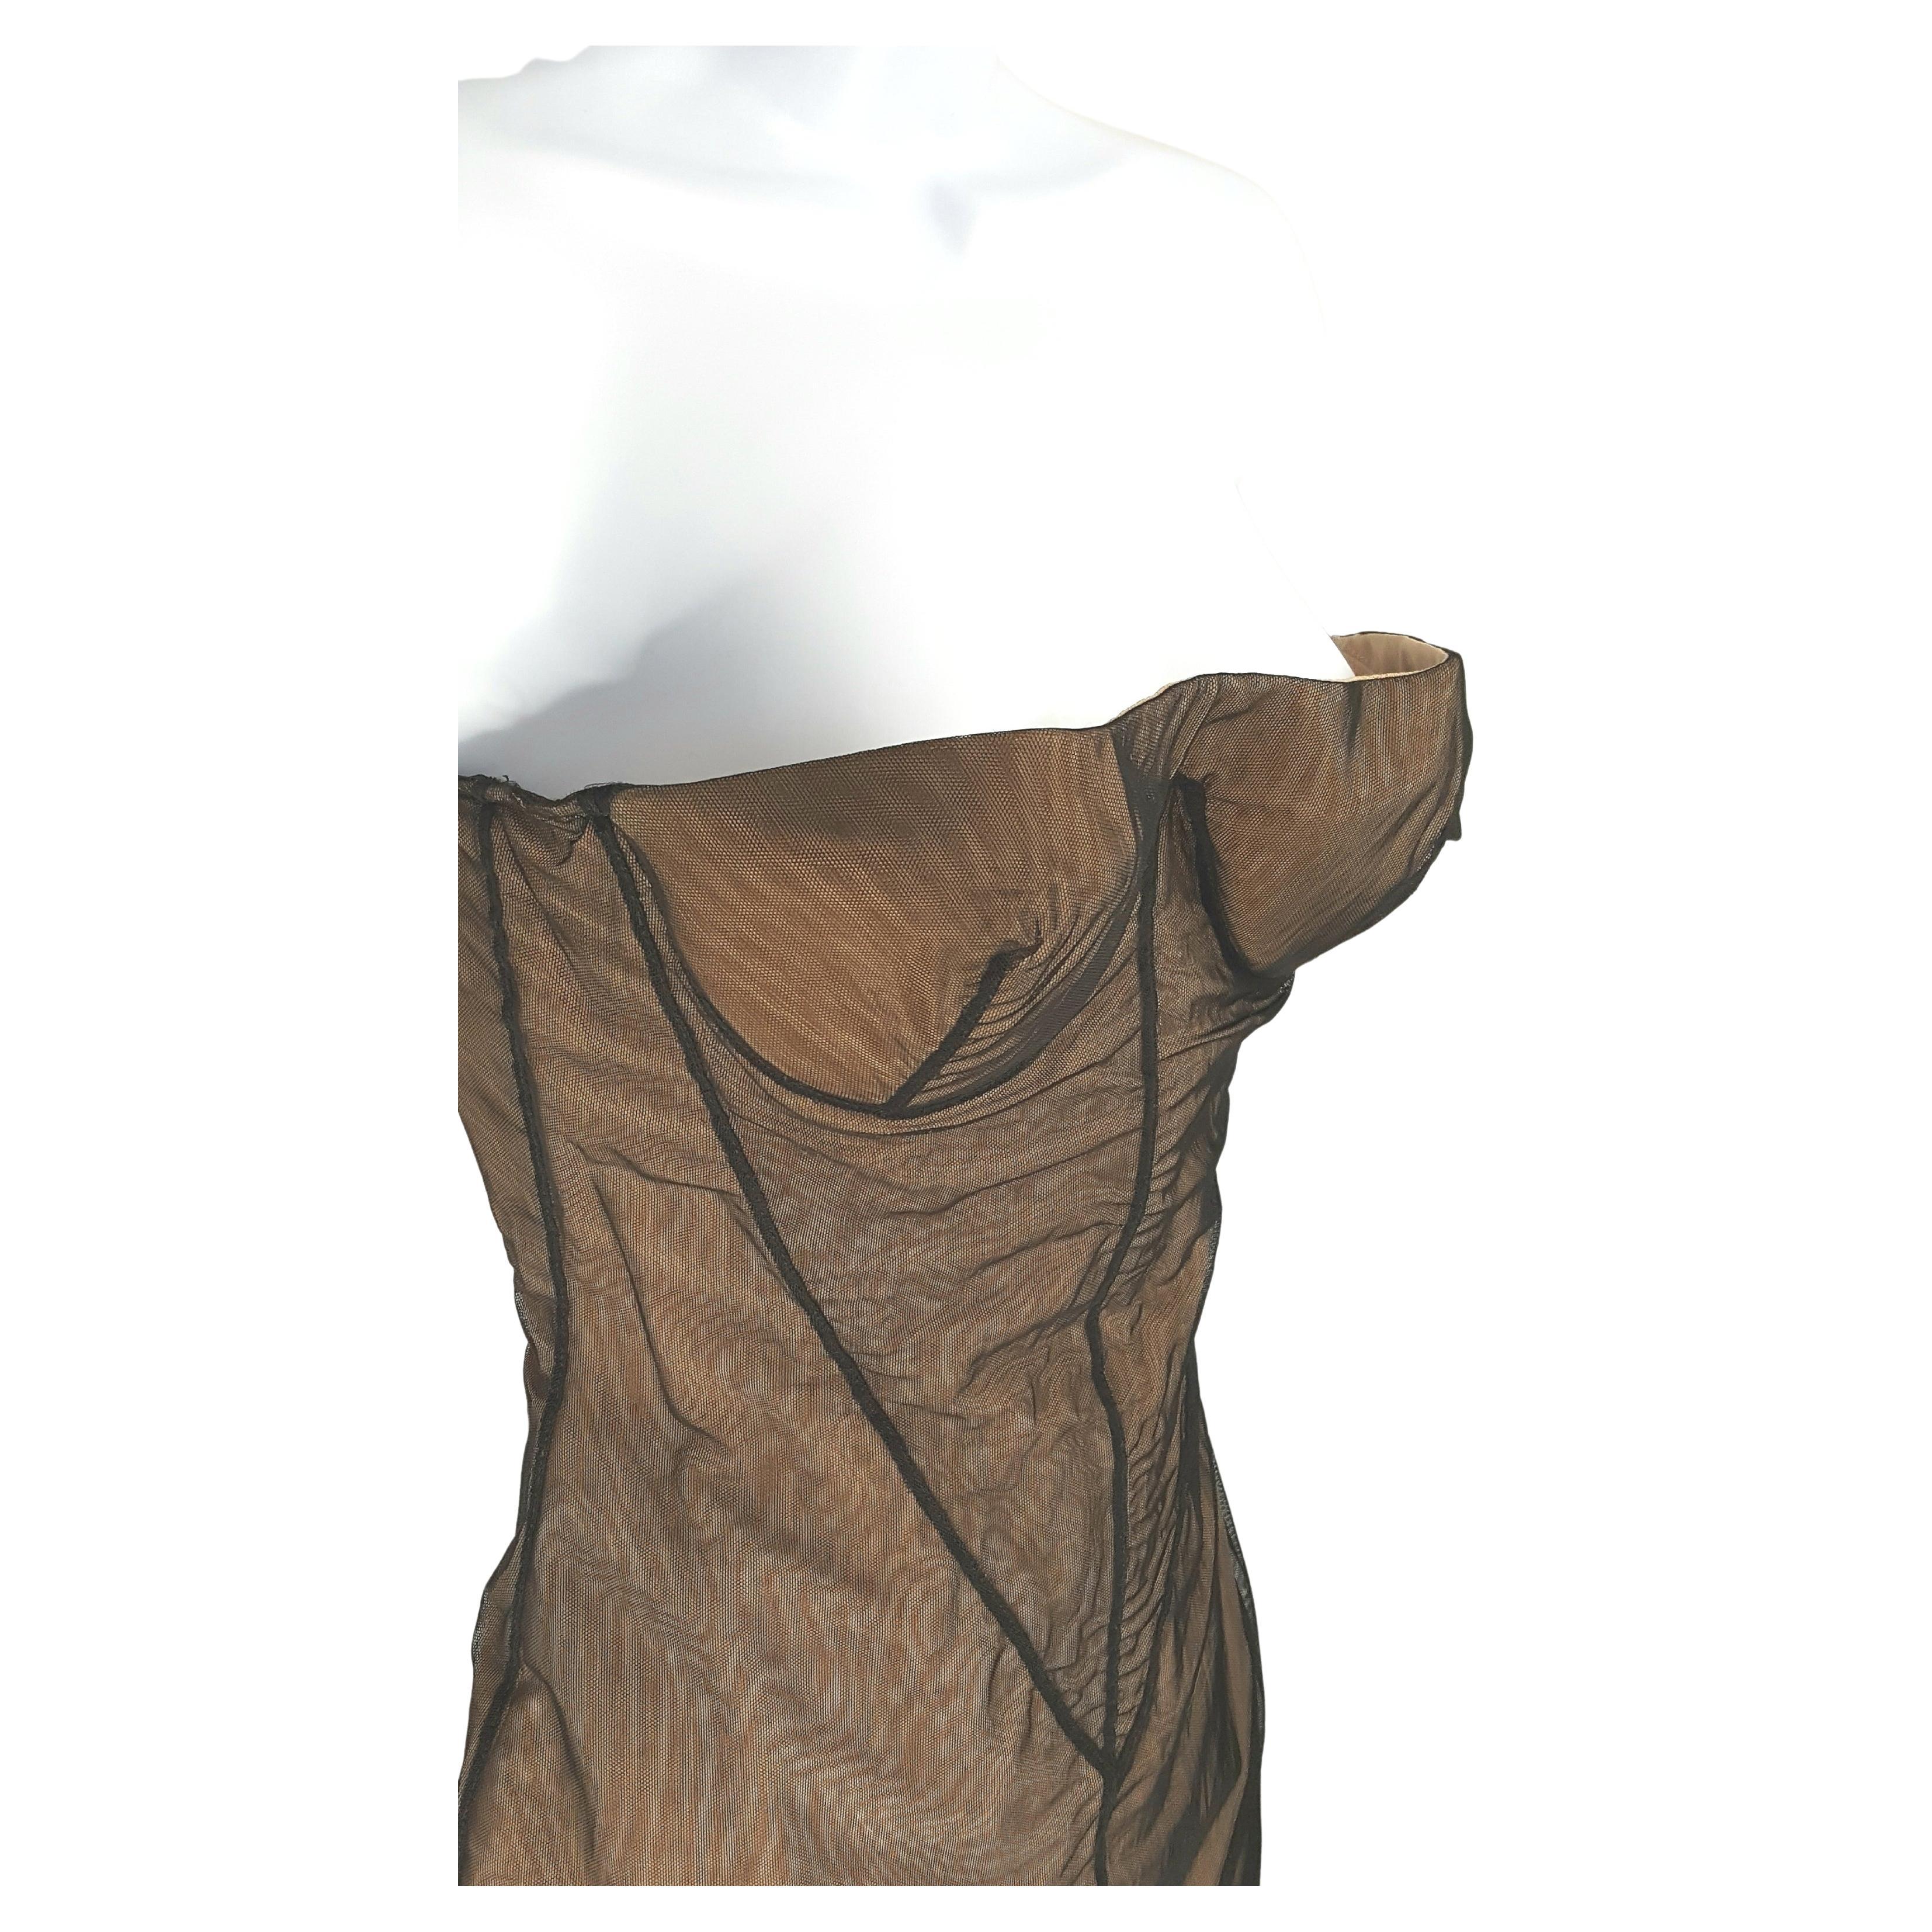 Gucci TomFord 2001 AwardYear RunwayLook2 Balconette Corset Strapless Nude Dress In Good Condition For Sale In Chicago, IL